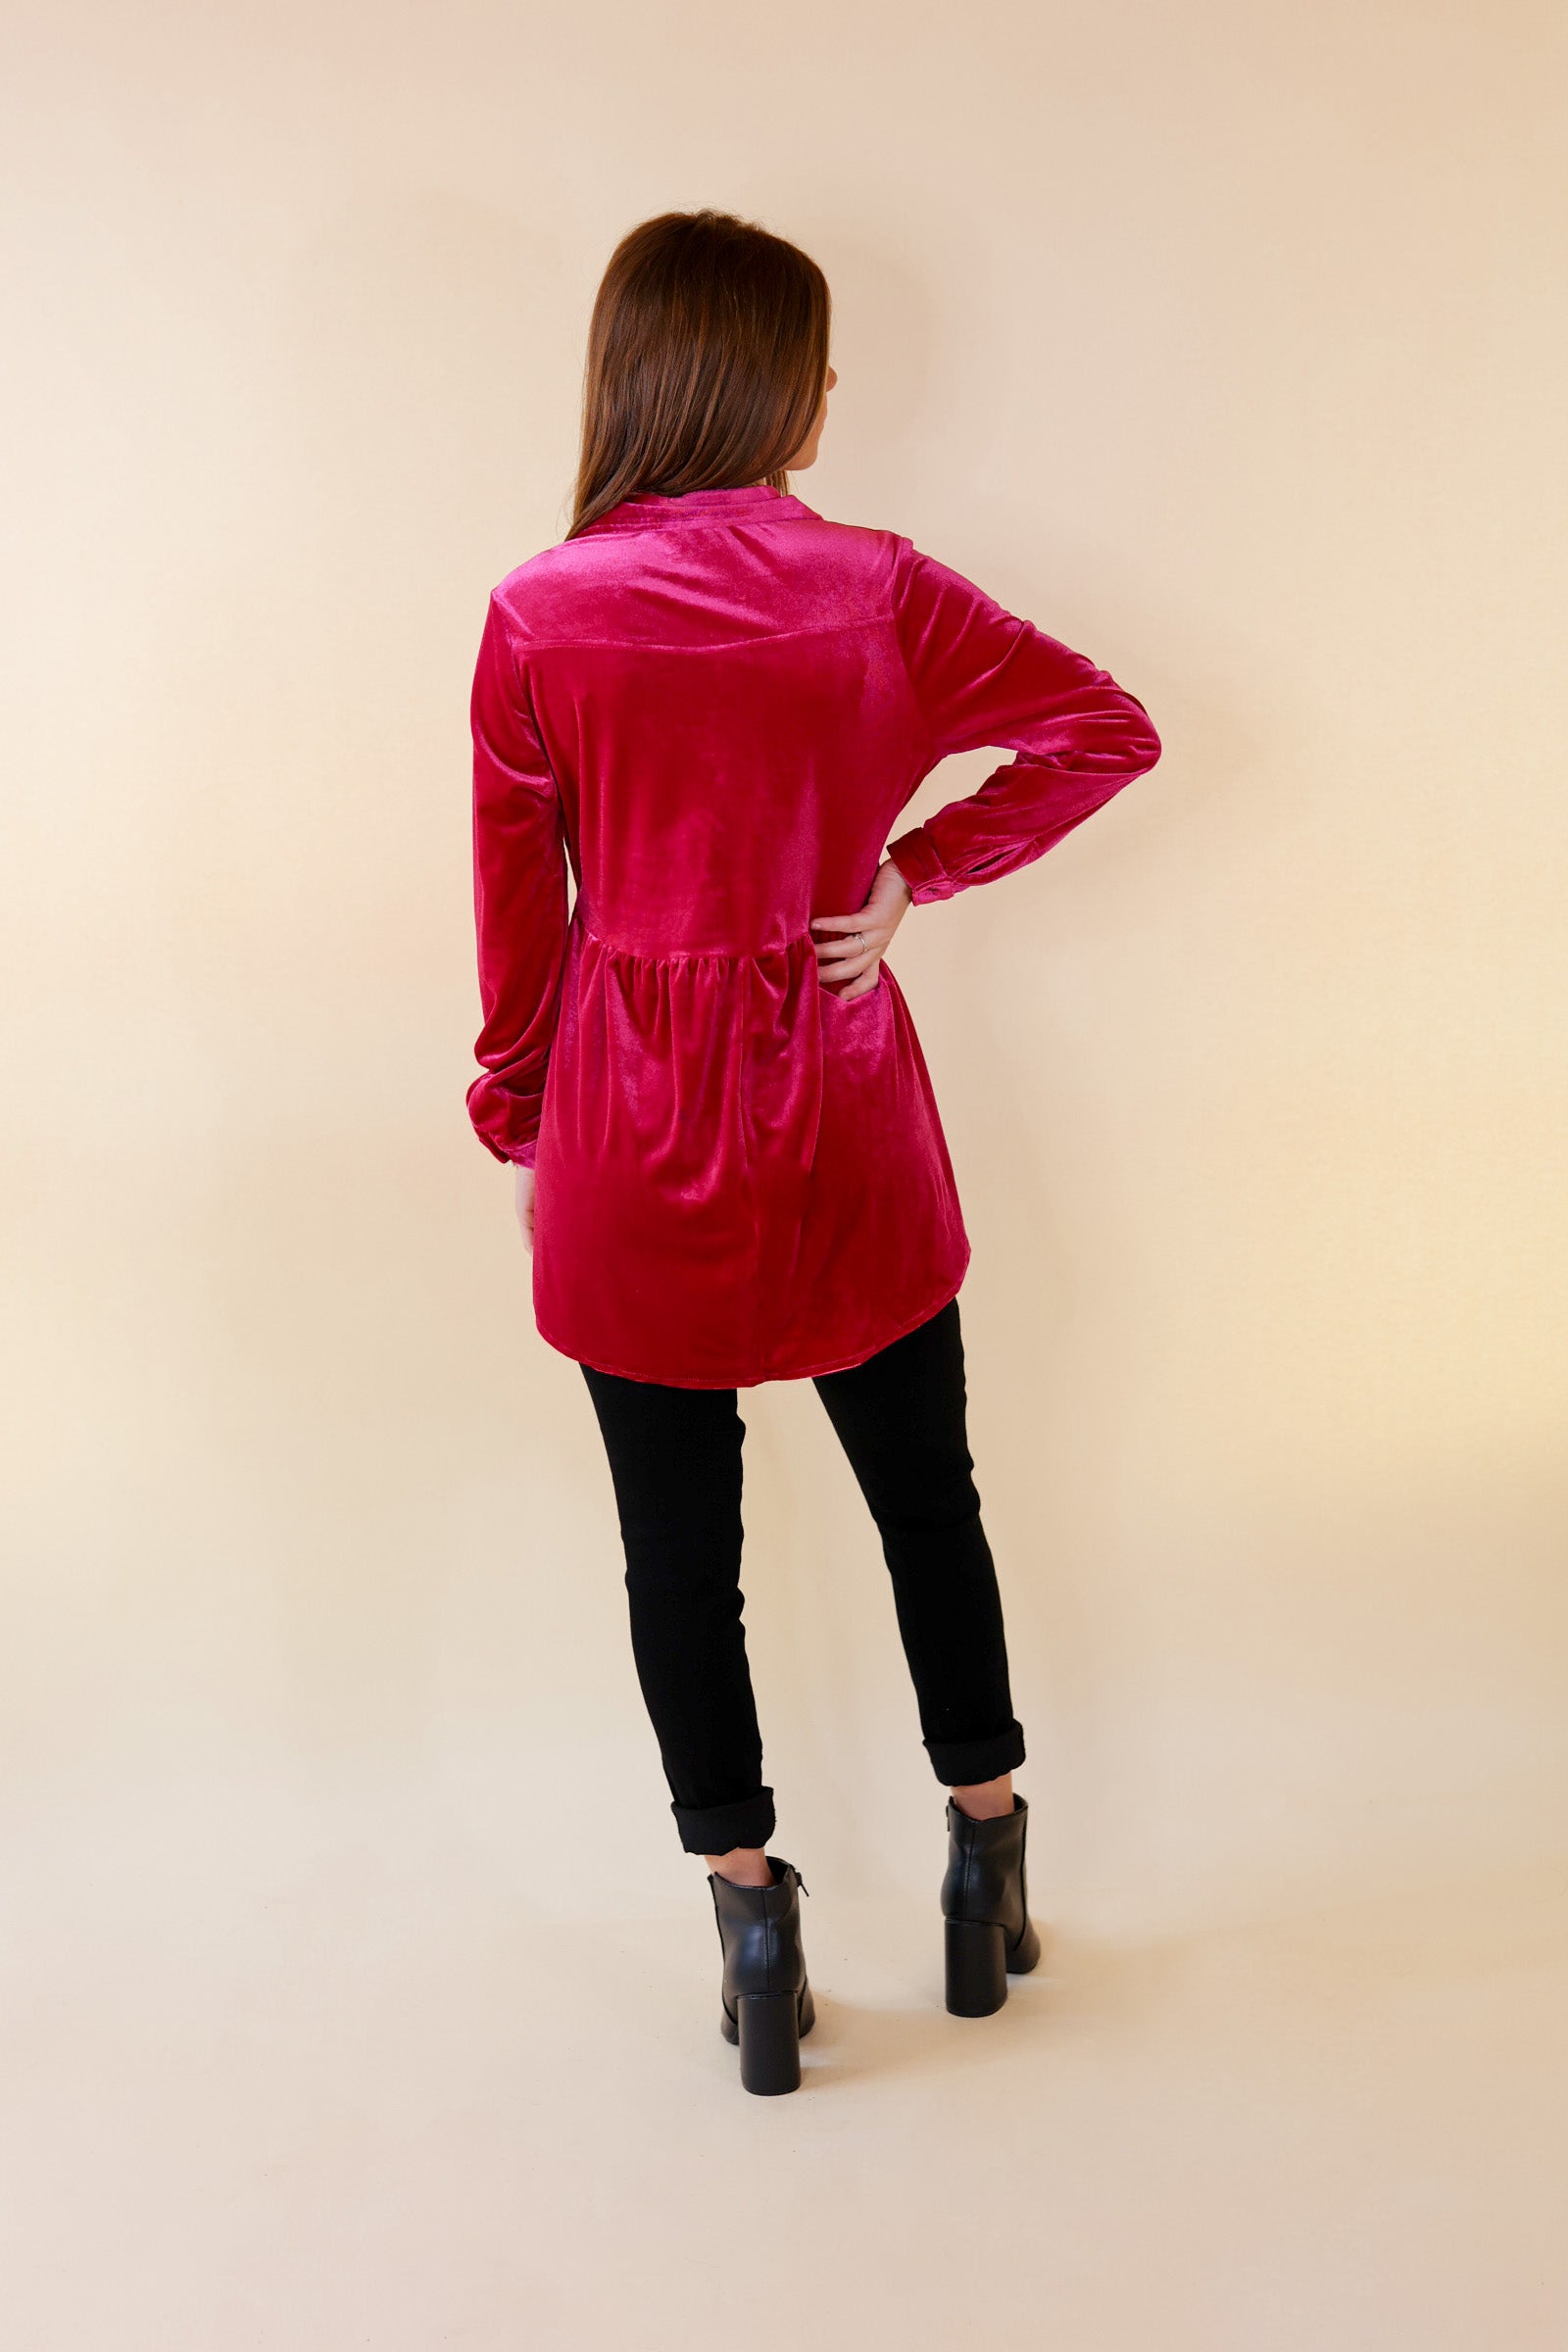 Call Me Yours Button Up Velvet Long Sleeve Babydoll Tunic Top in Raspberry Pink - Giddy Up Glamour Boutique